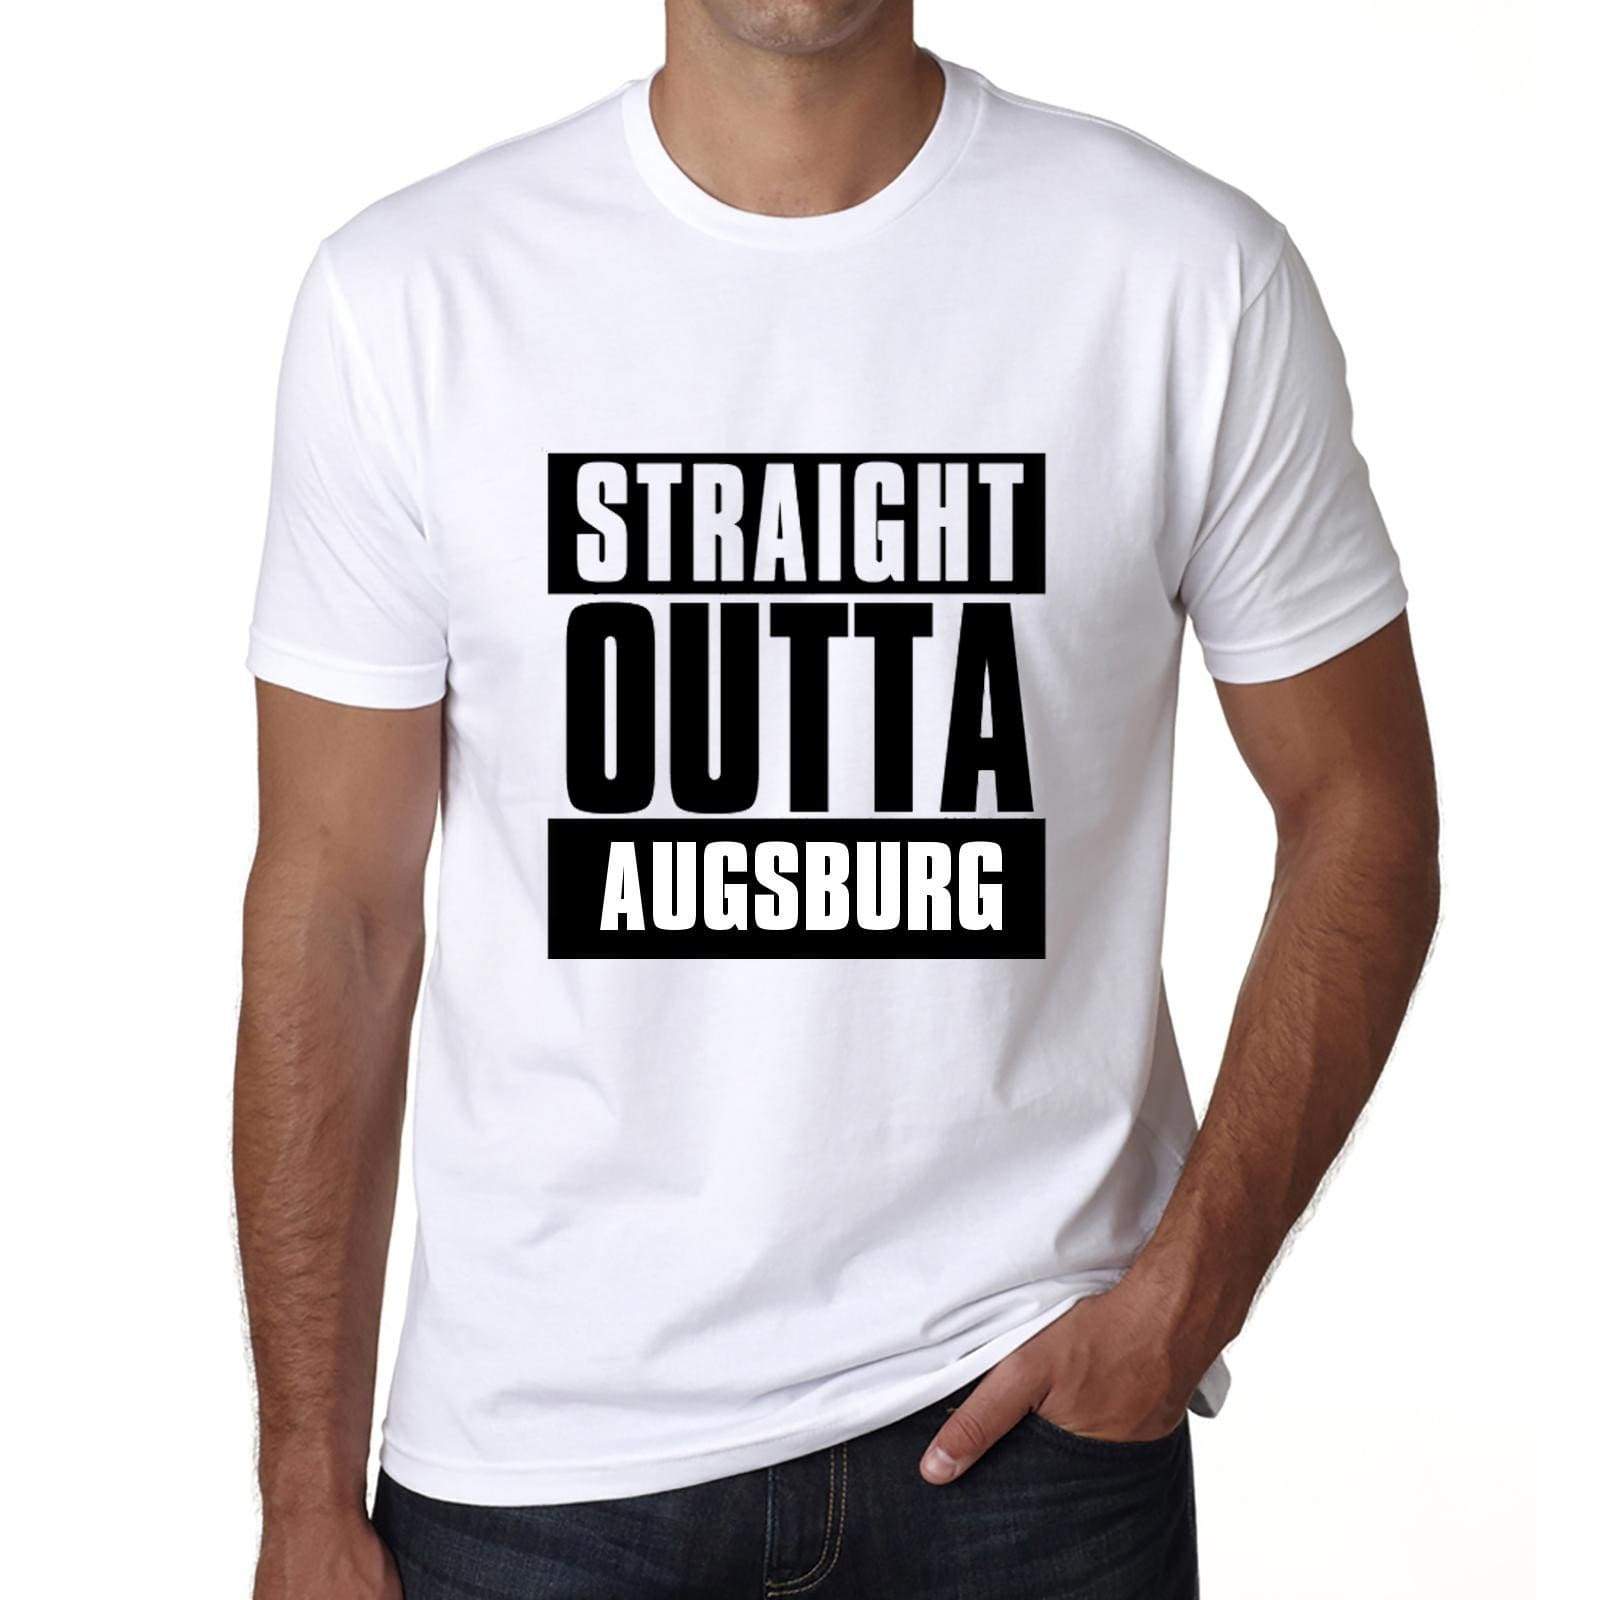 Straight Outta Augsburg Mens Short Sleeve Round Neck T-Shirt 00027 - White / S - Casual